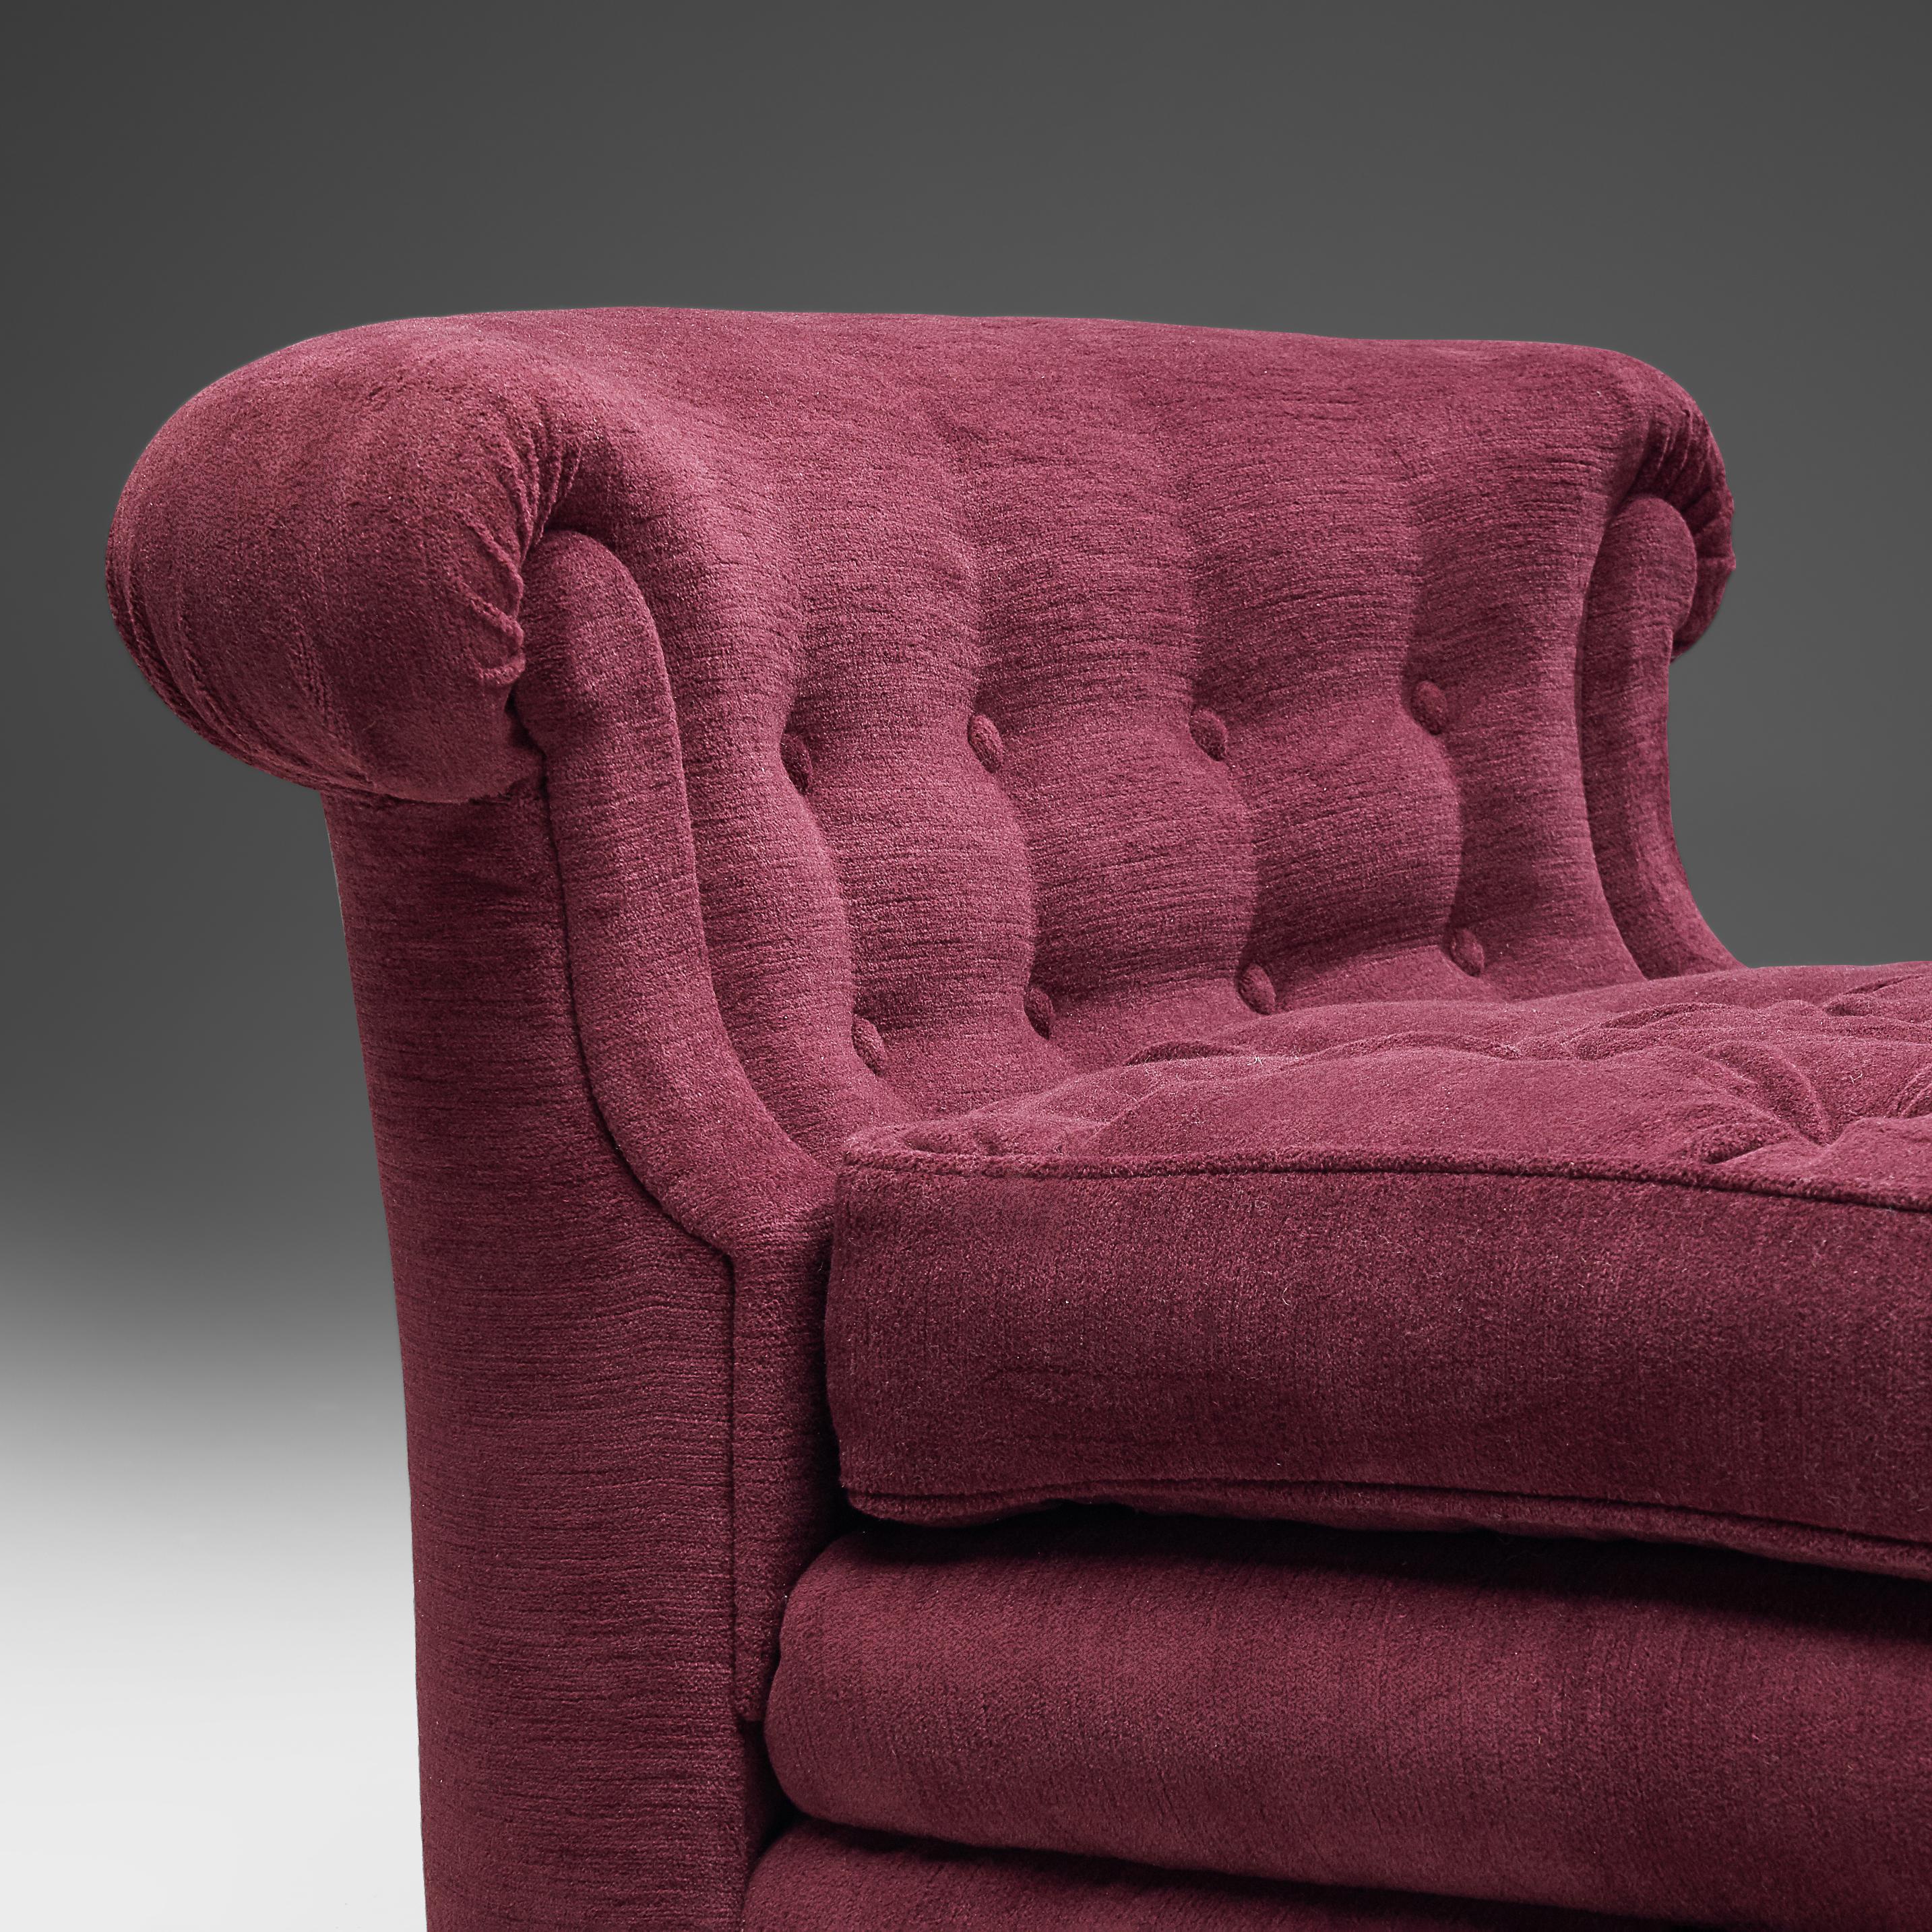 maroon chaise lounge